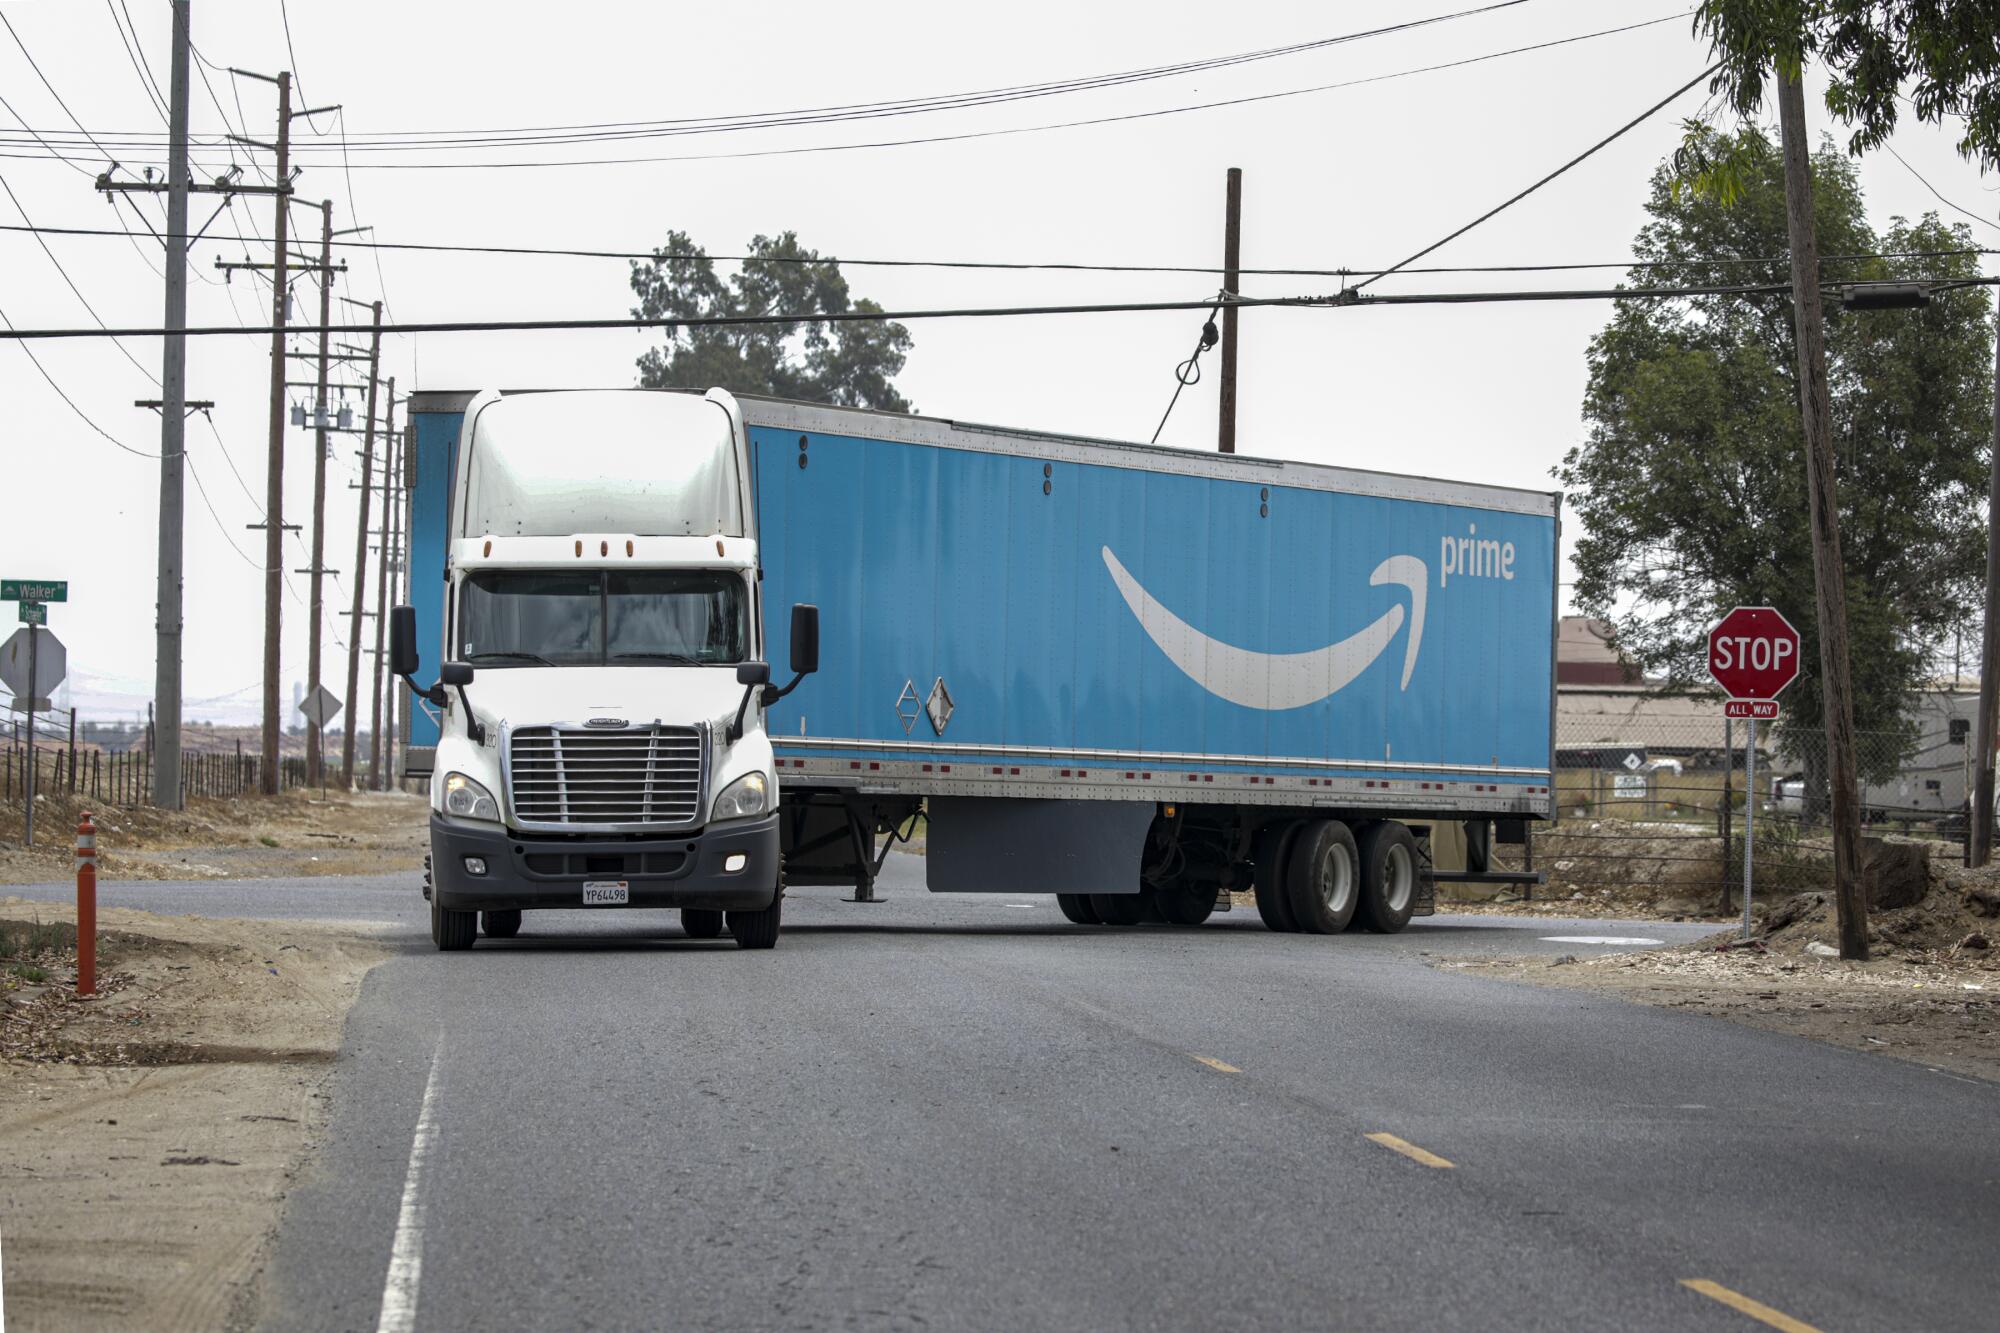 An Amazon truck negotiates a sharp turn on a road.